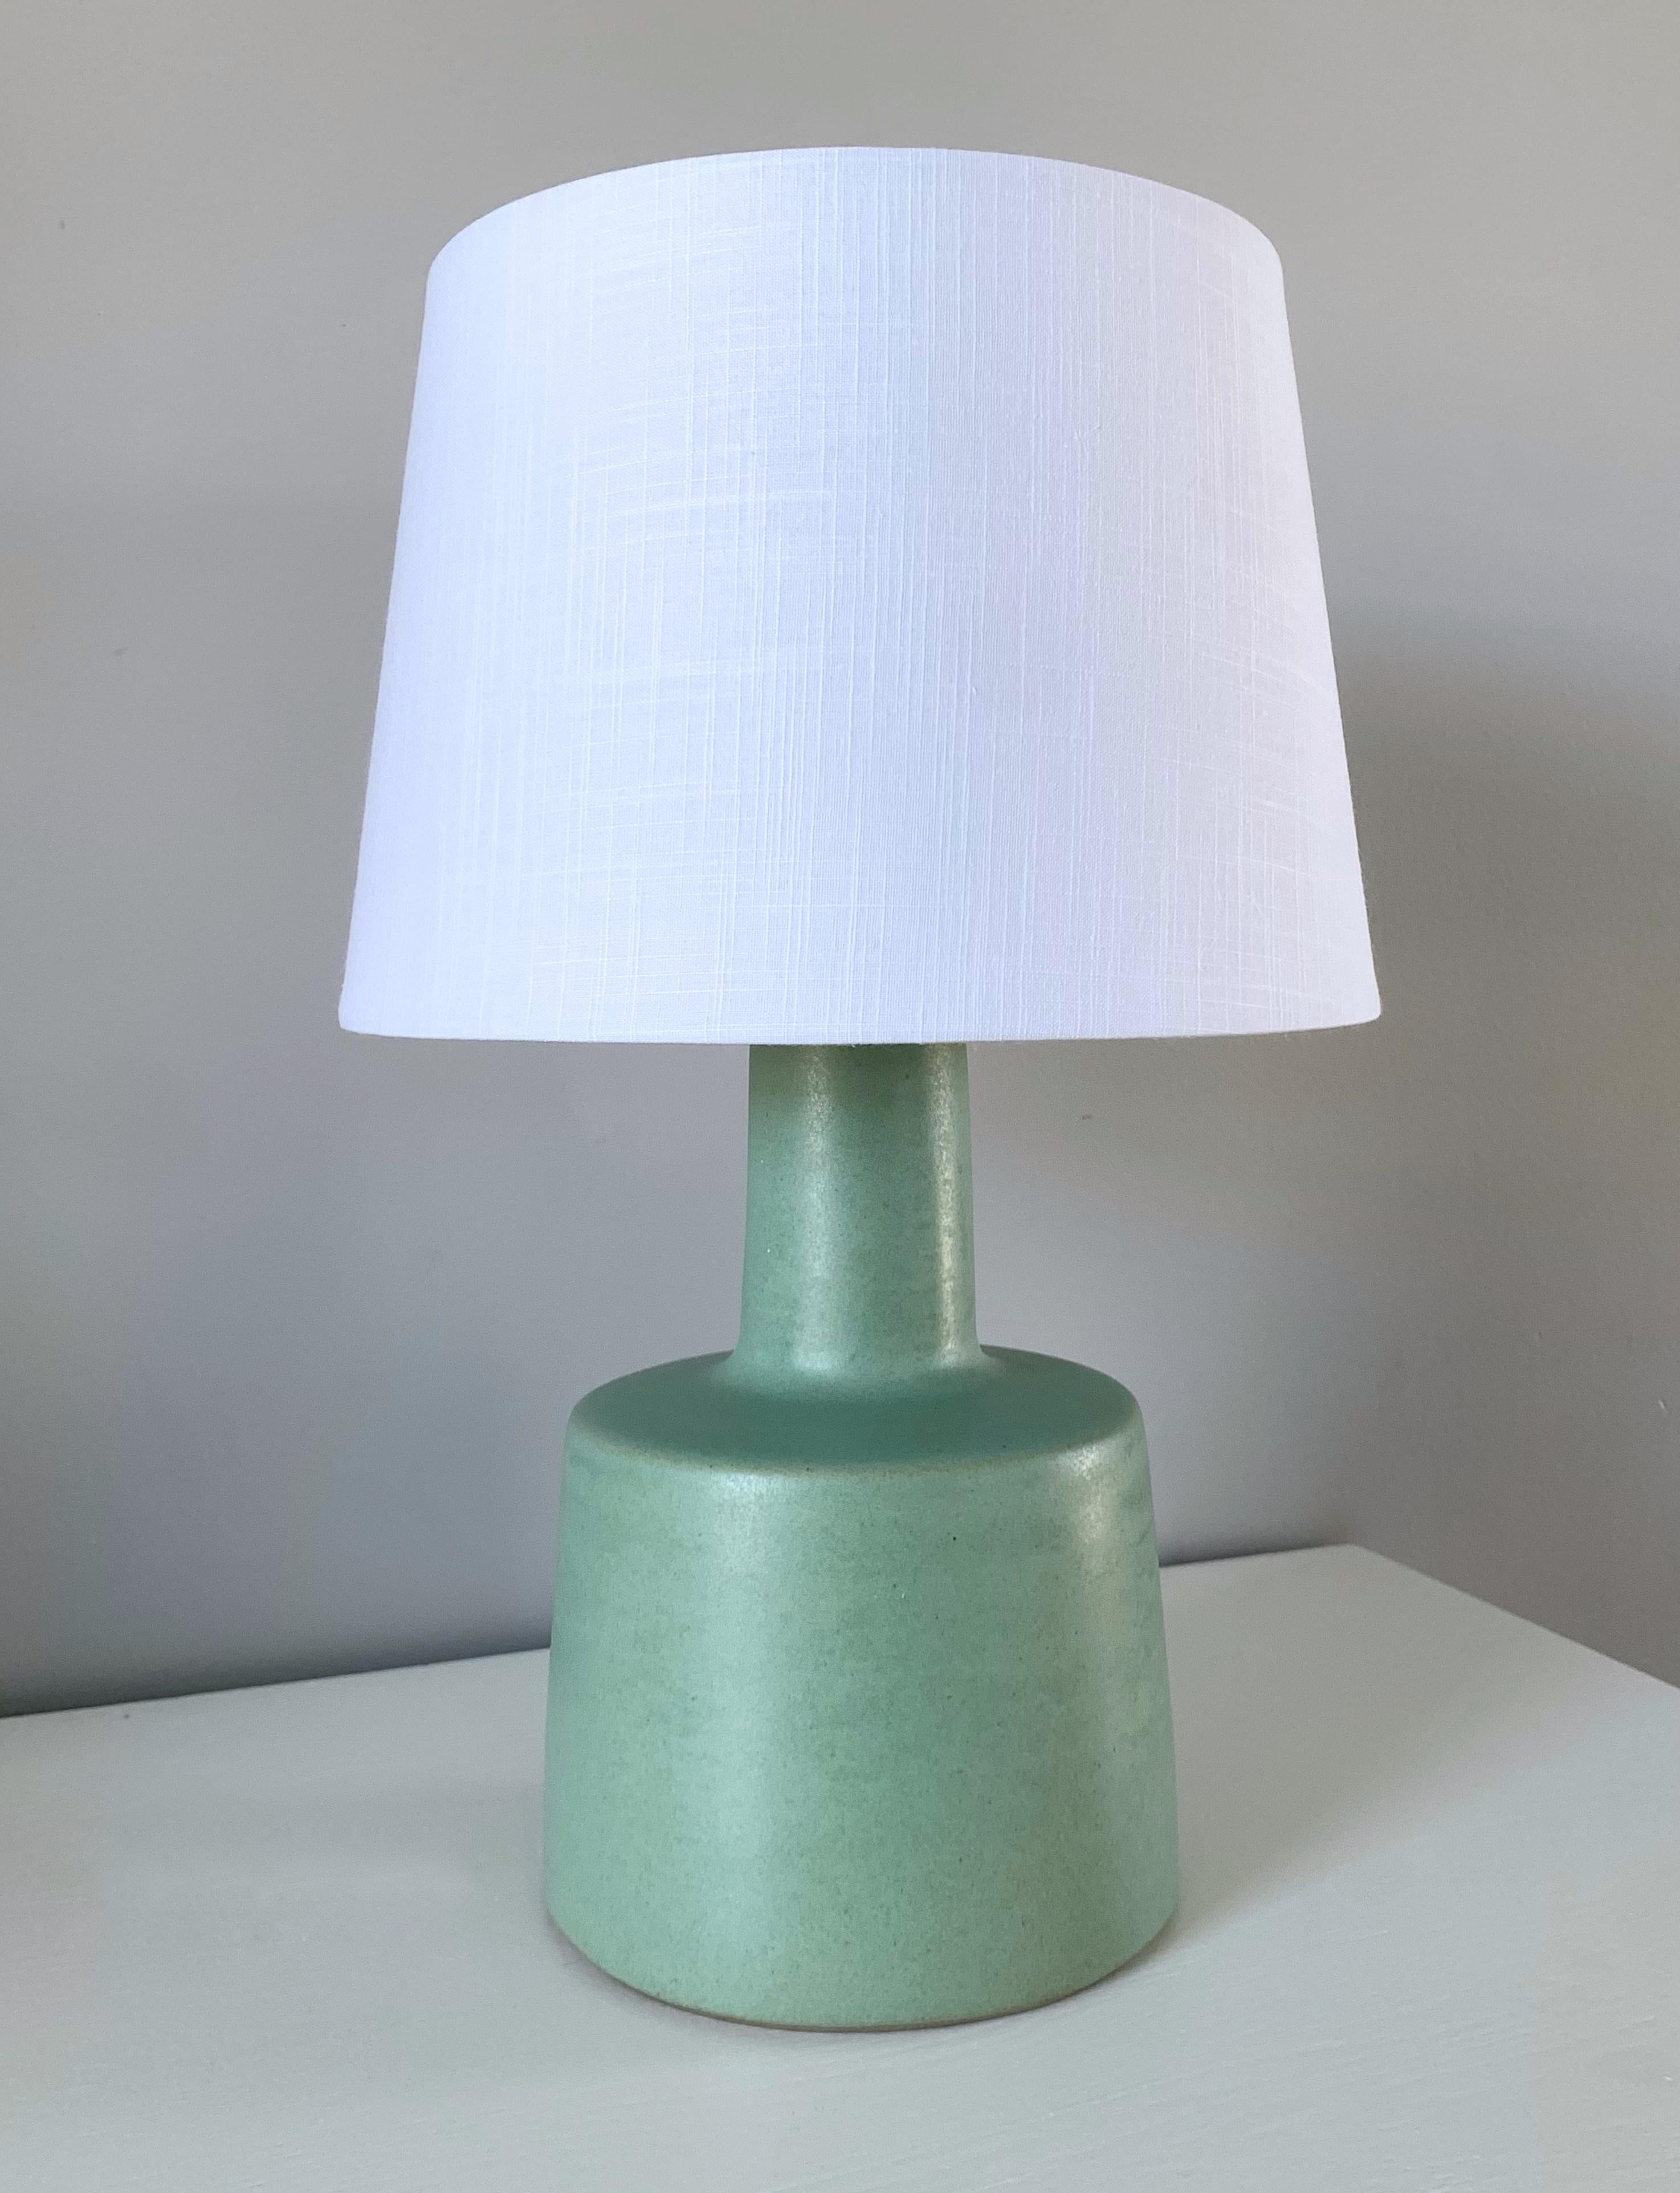 This stunning table lamp is designed by the famed husband and wife duo, Jane & Gordon Martz. The color is a beautiful sea-foam green with a lovely delicate aged patina. The base is signed and in excellent condition. The lamp is sold without the lamp